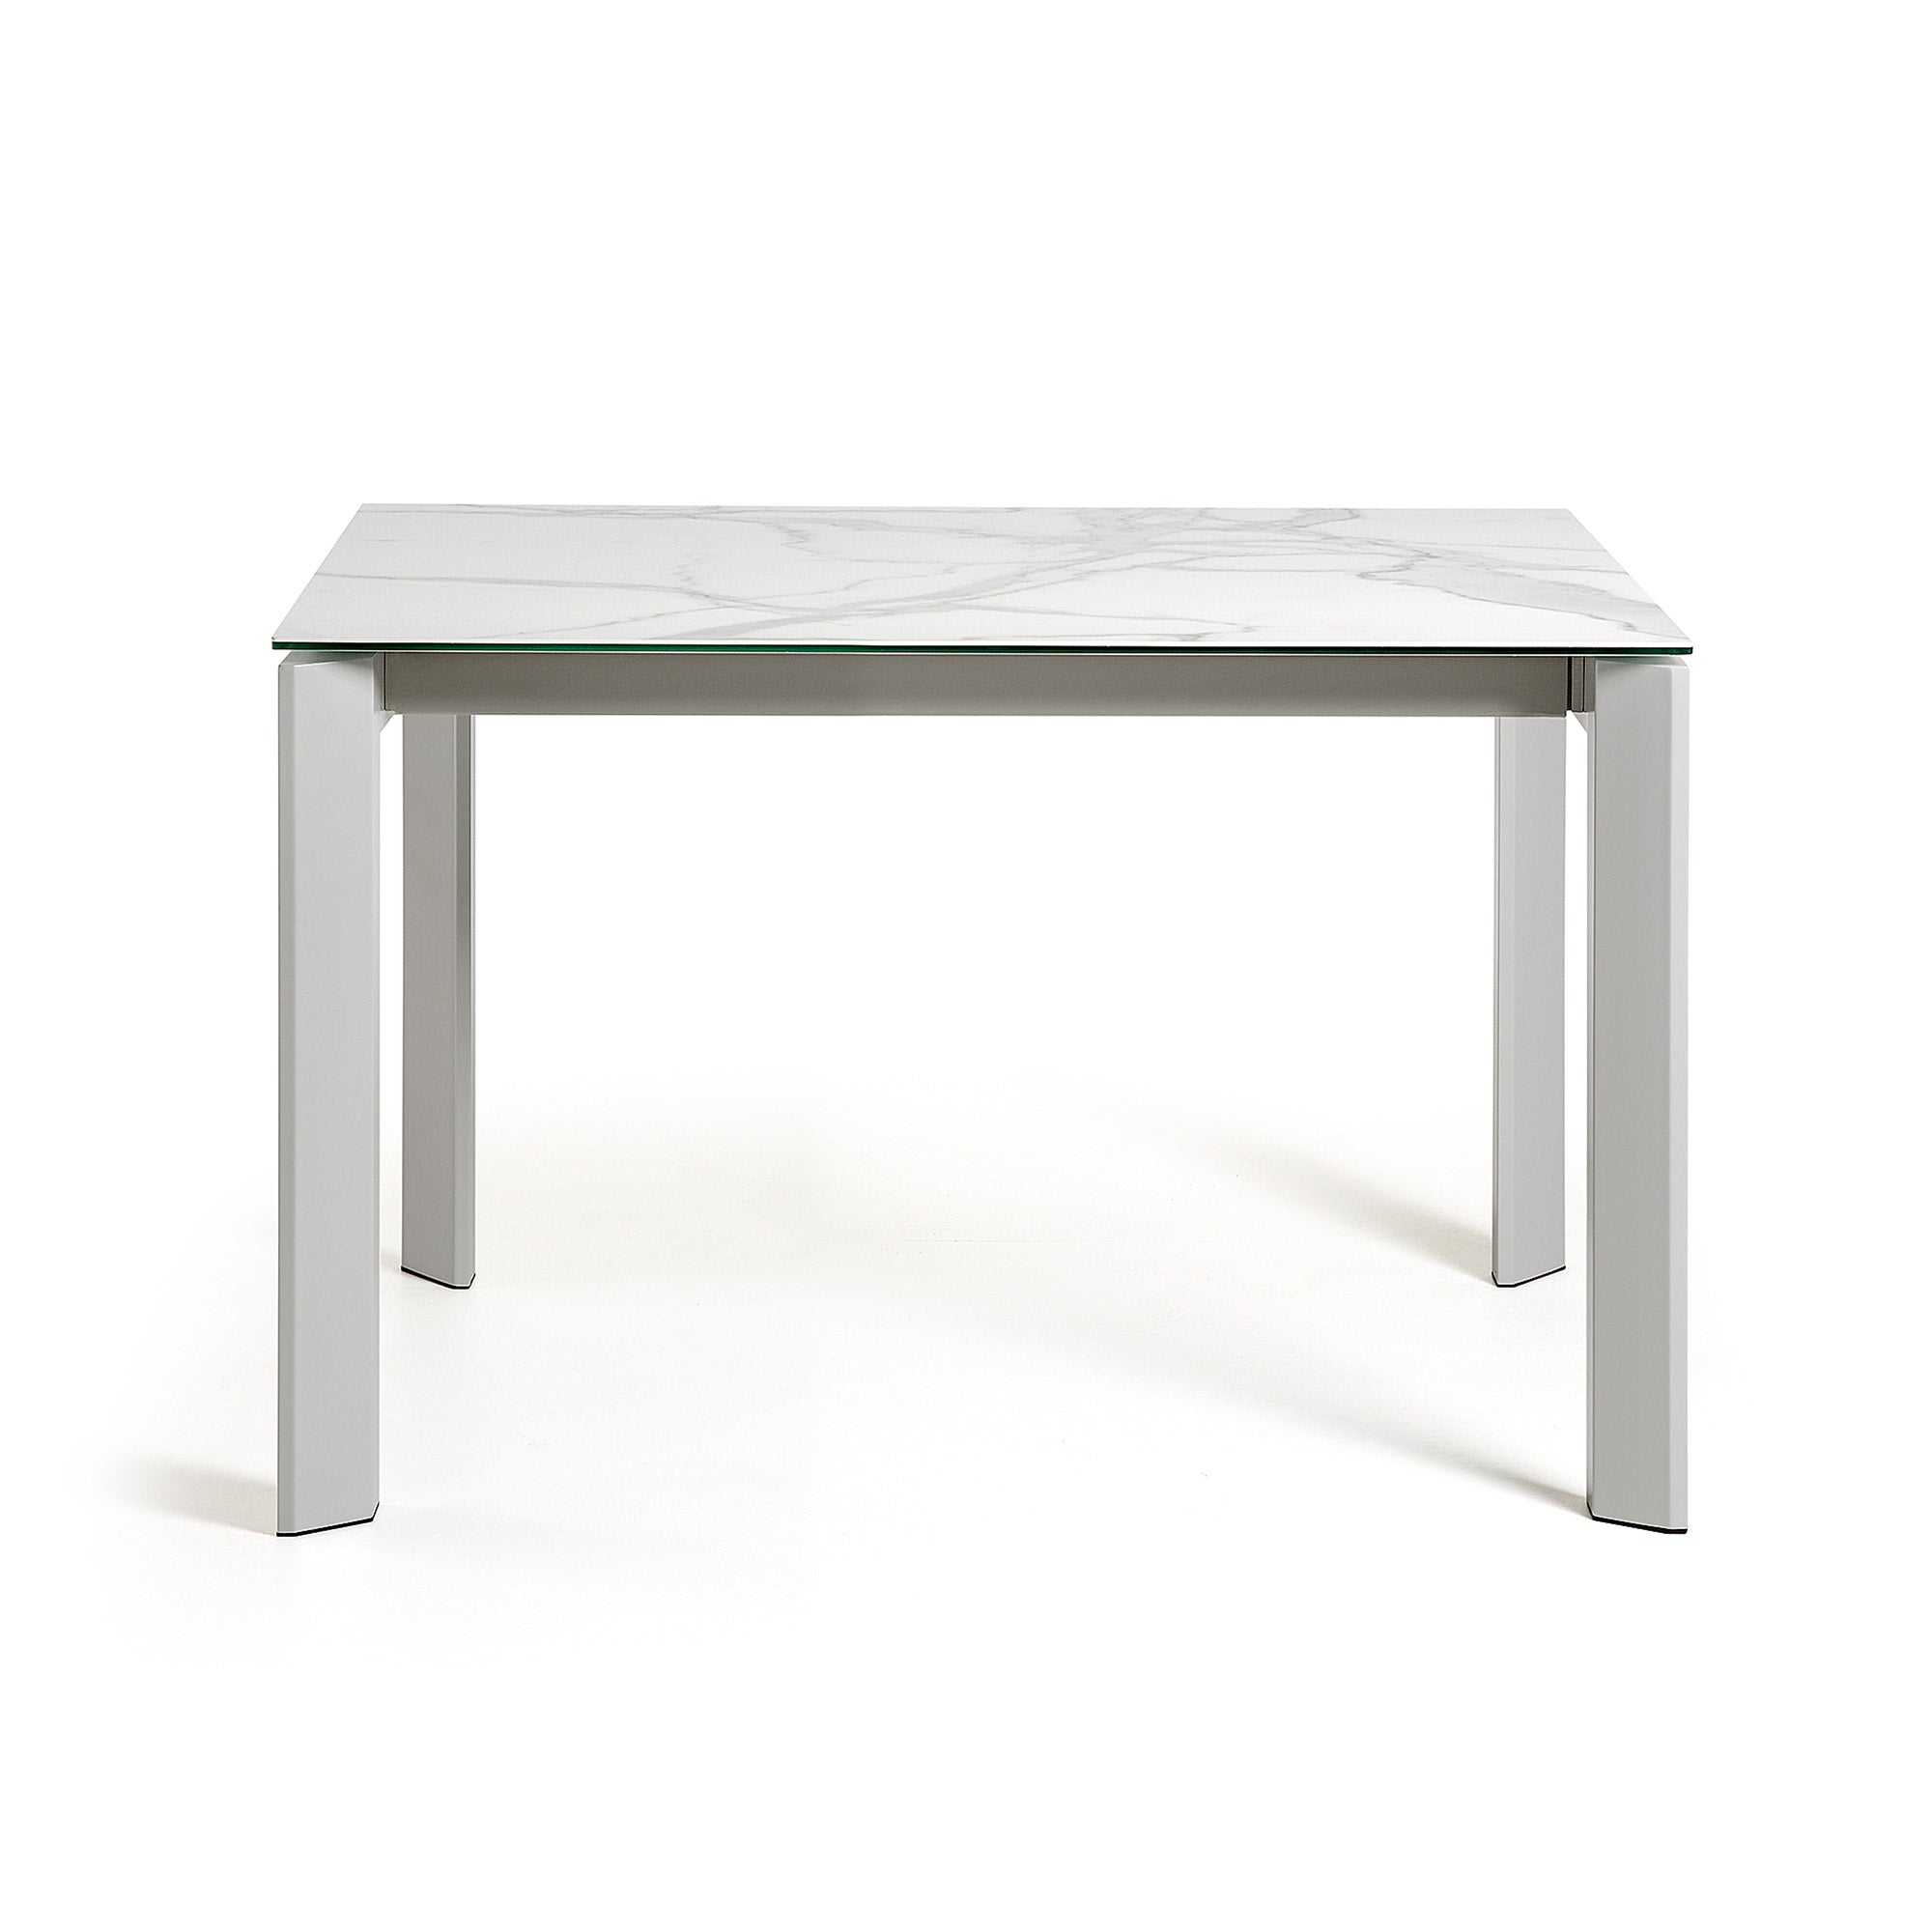 Axis porcelain extendable table with White Kalos finish and gray legs 120 (180) cm